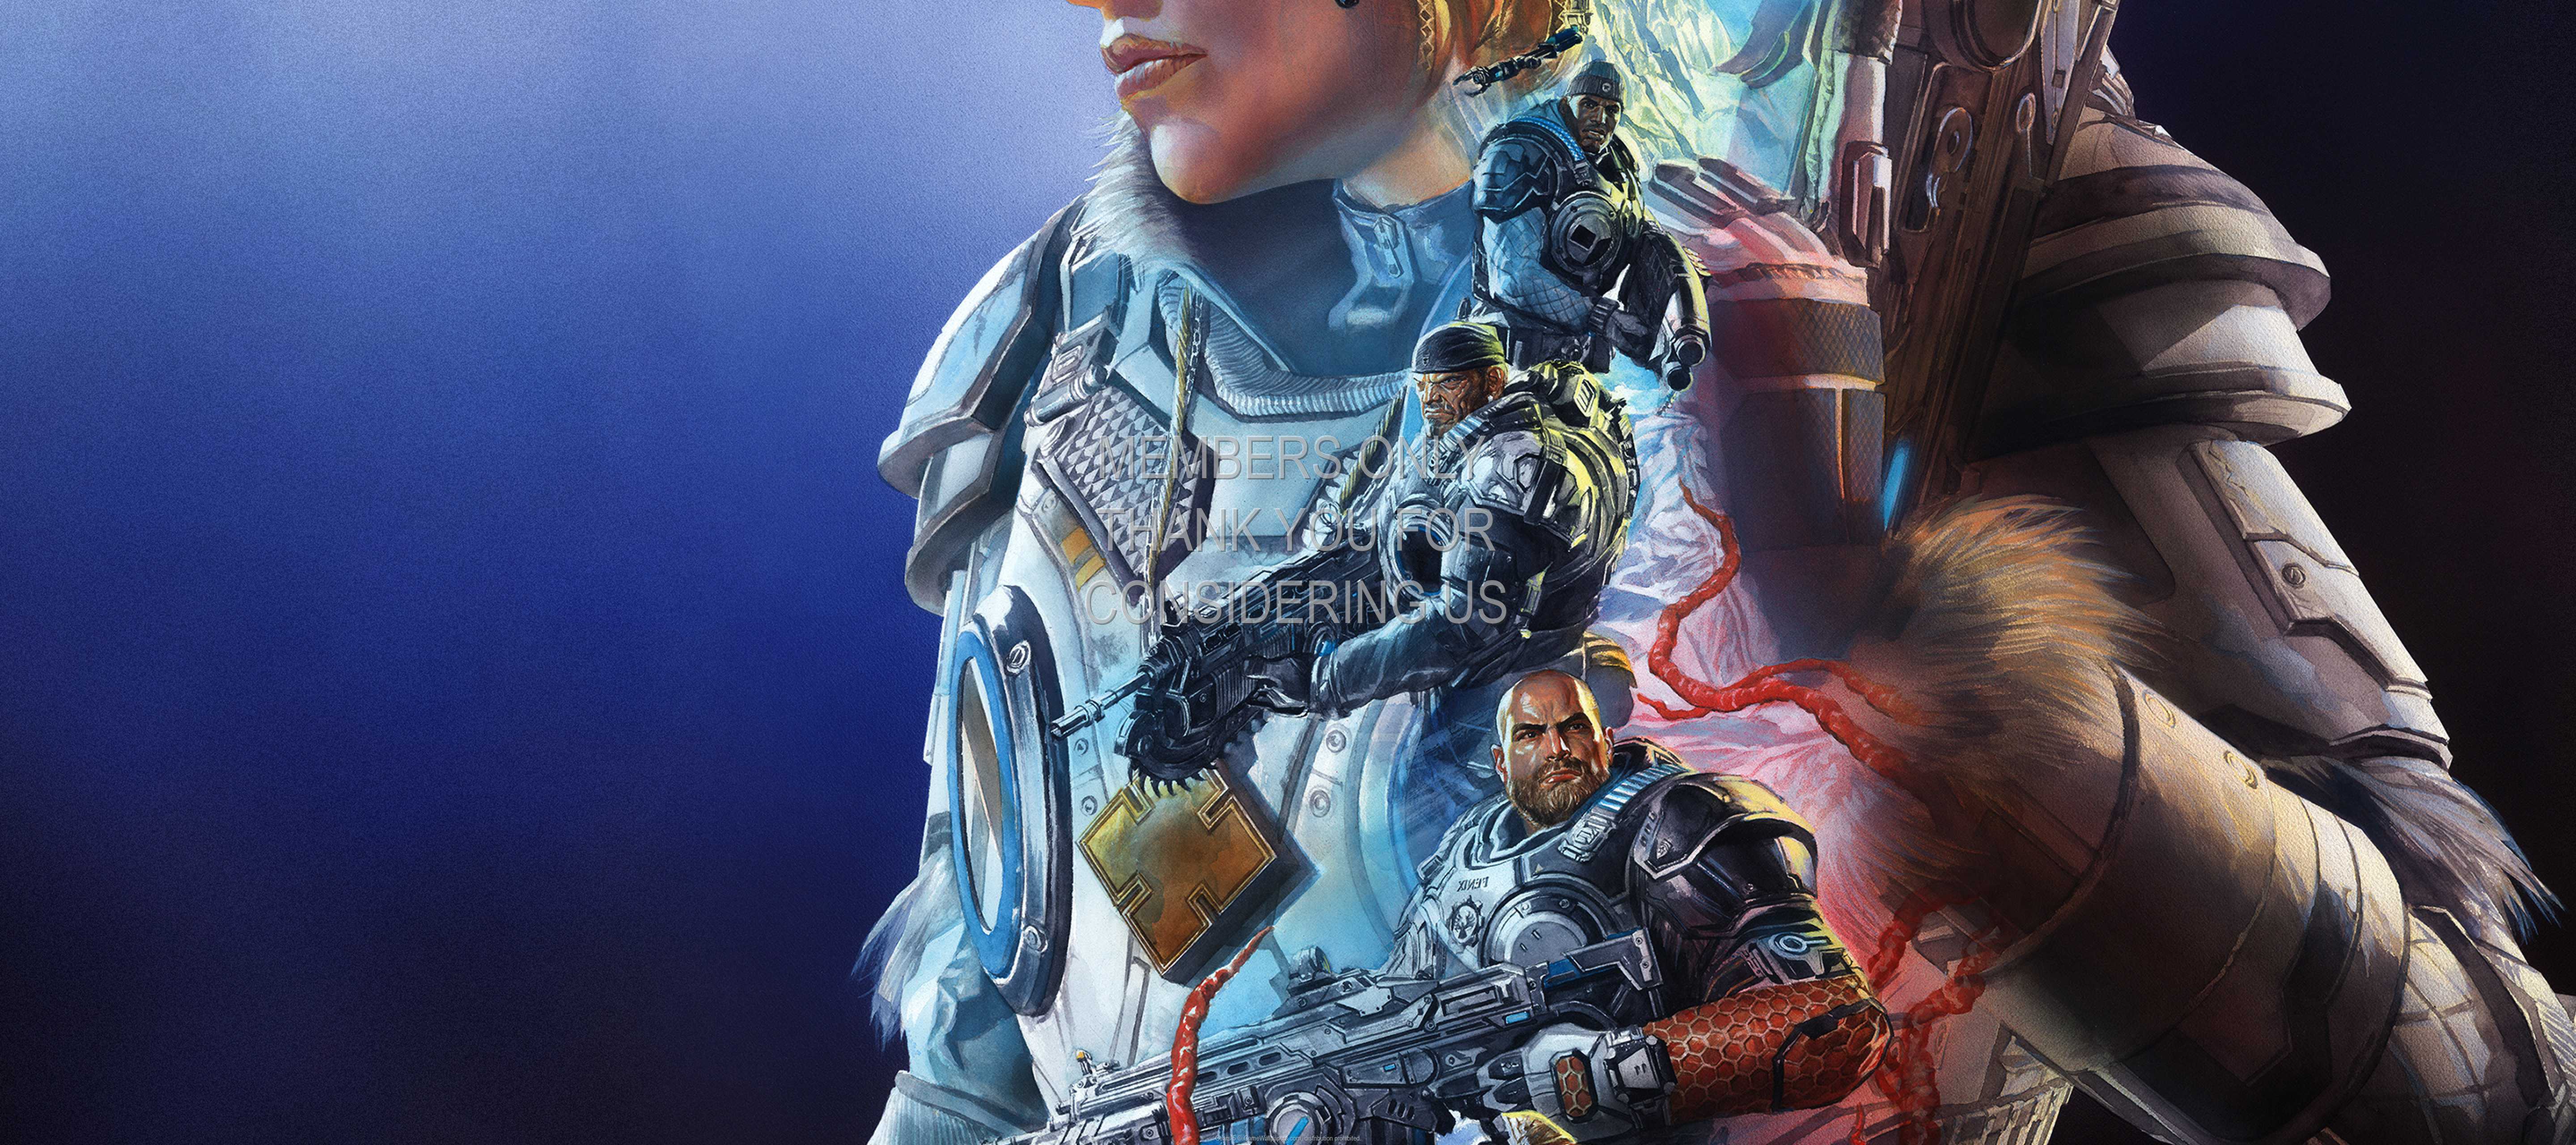 Gears 5 1440p%20Horizontal Mobile wallpaper or background 02